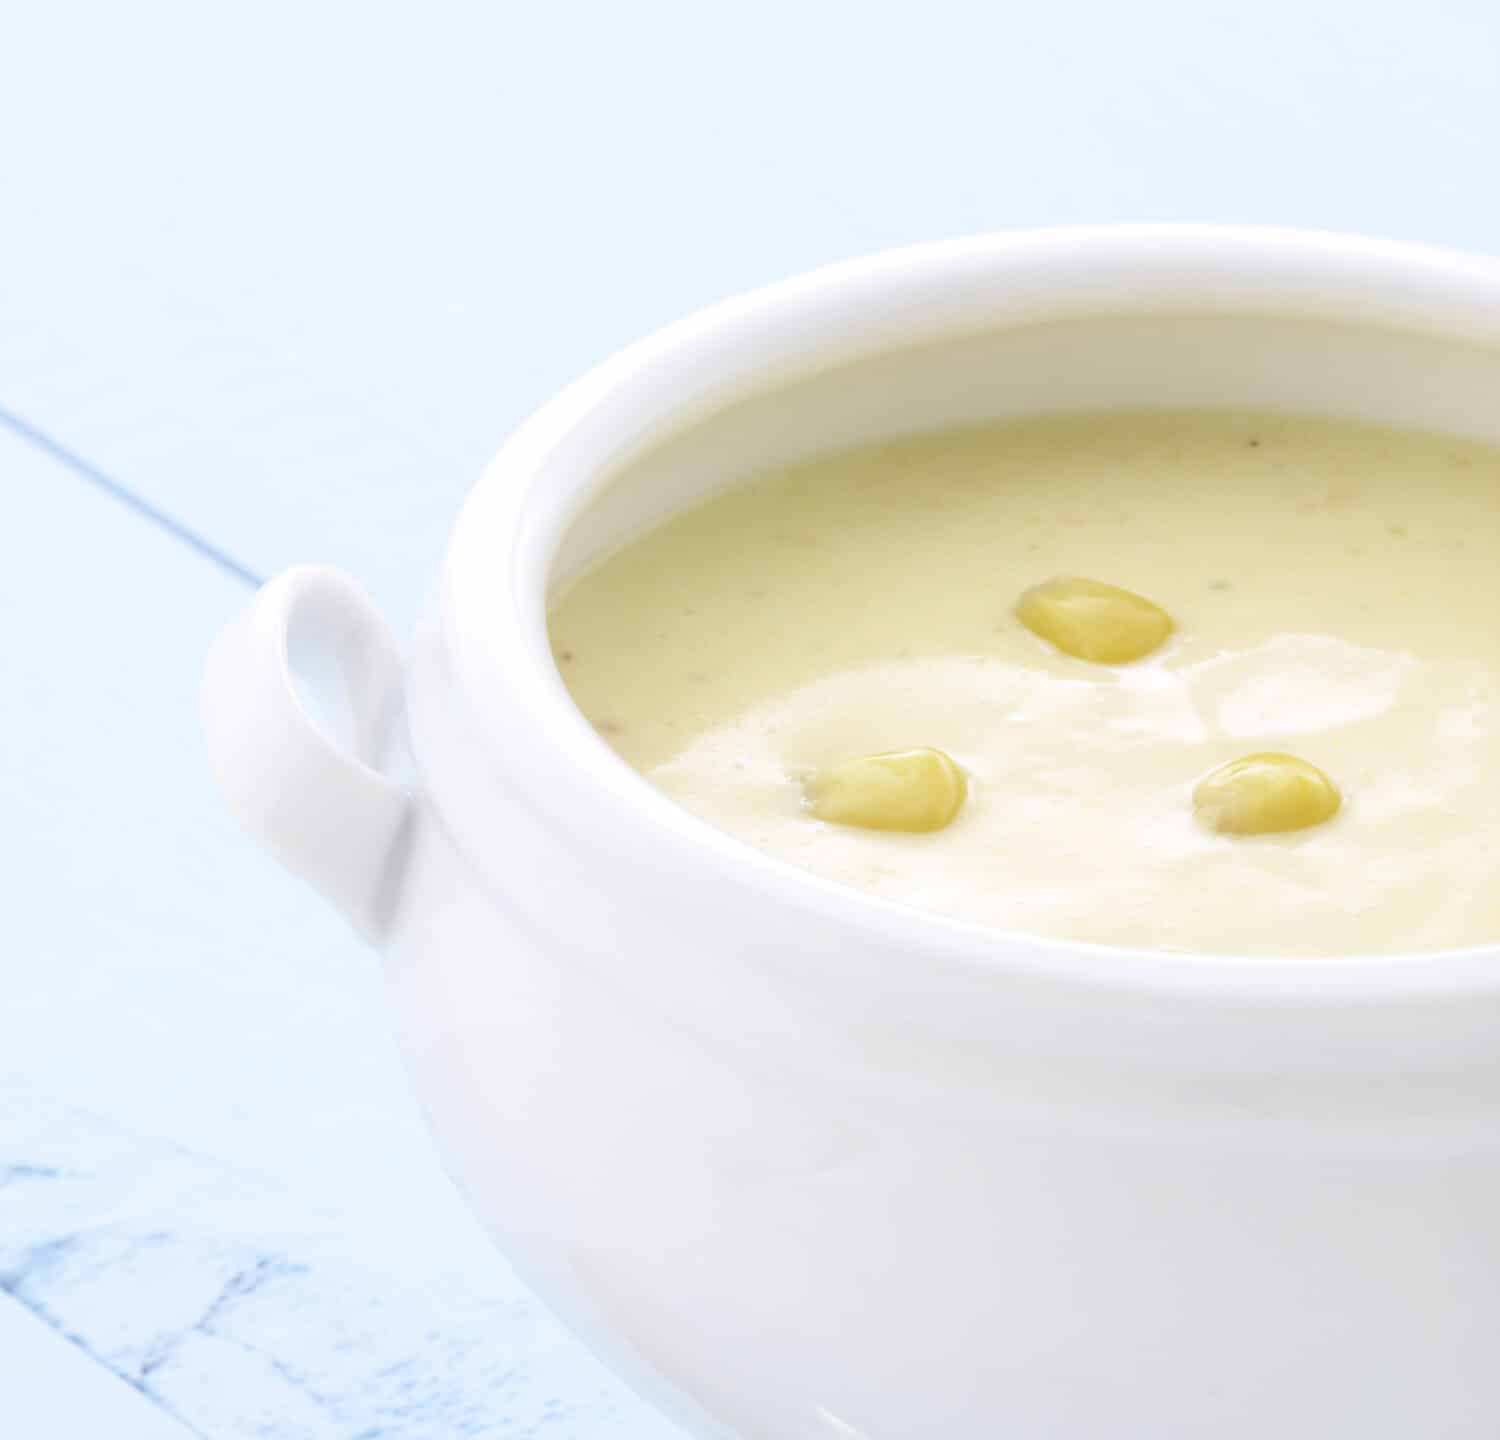 Smooth, creamy and slightly seasoned corn bisque, this delicious cream soup is a type of thick soup similar to New England clam chowder